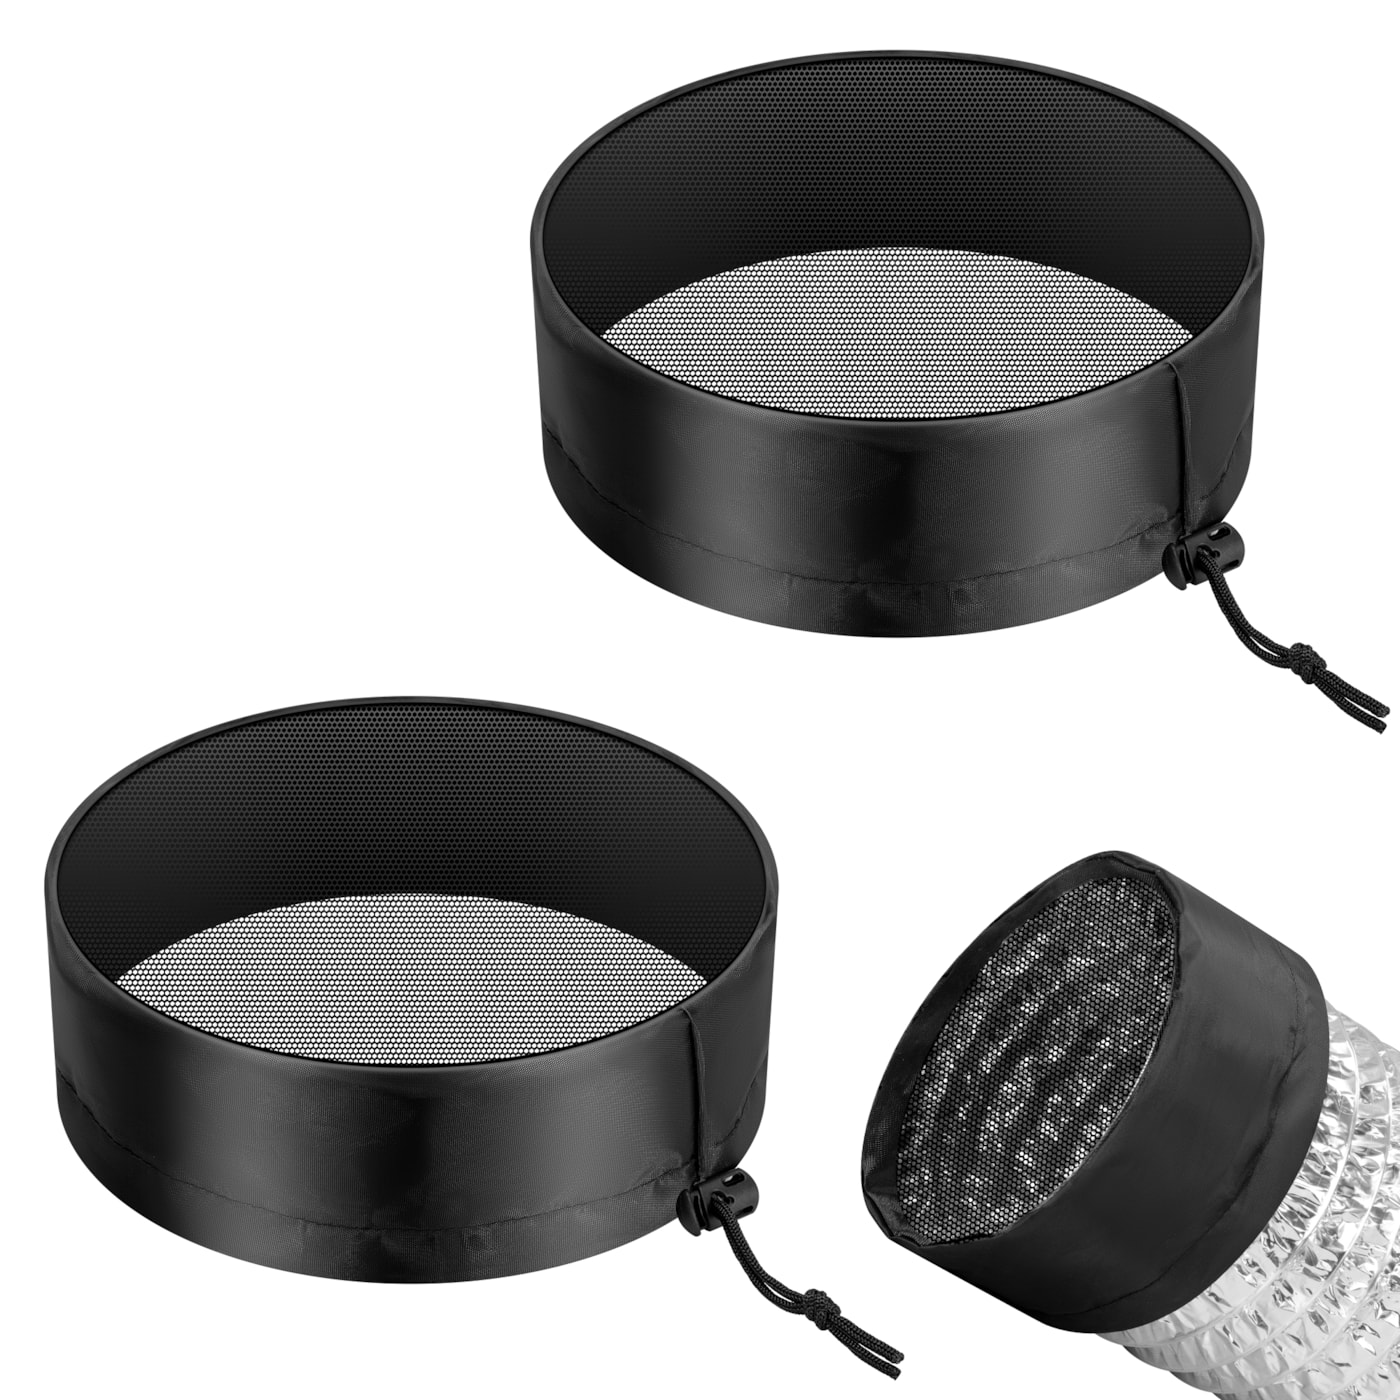 VIVOSUN 8" Grow Tent Duct Filter Vent Cover w/ Elastic Band and Fixed Buckle, 2 Pcs